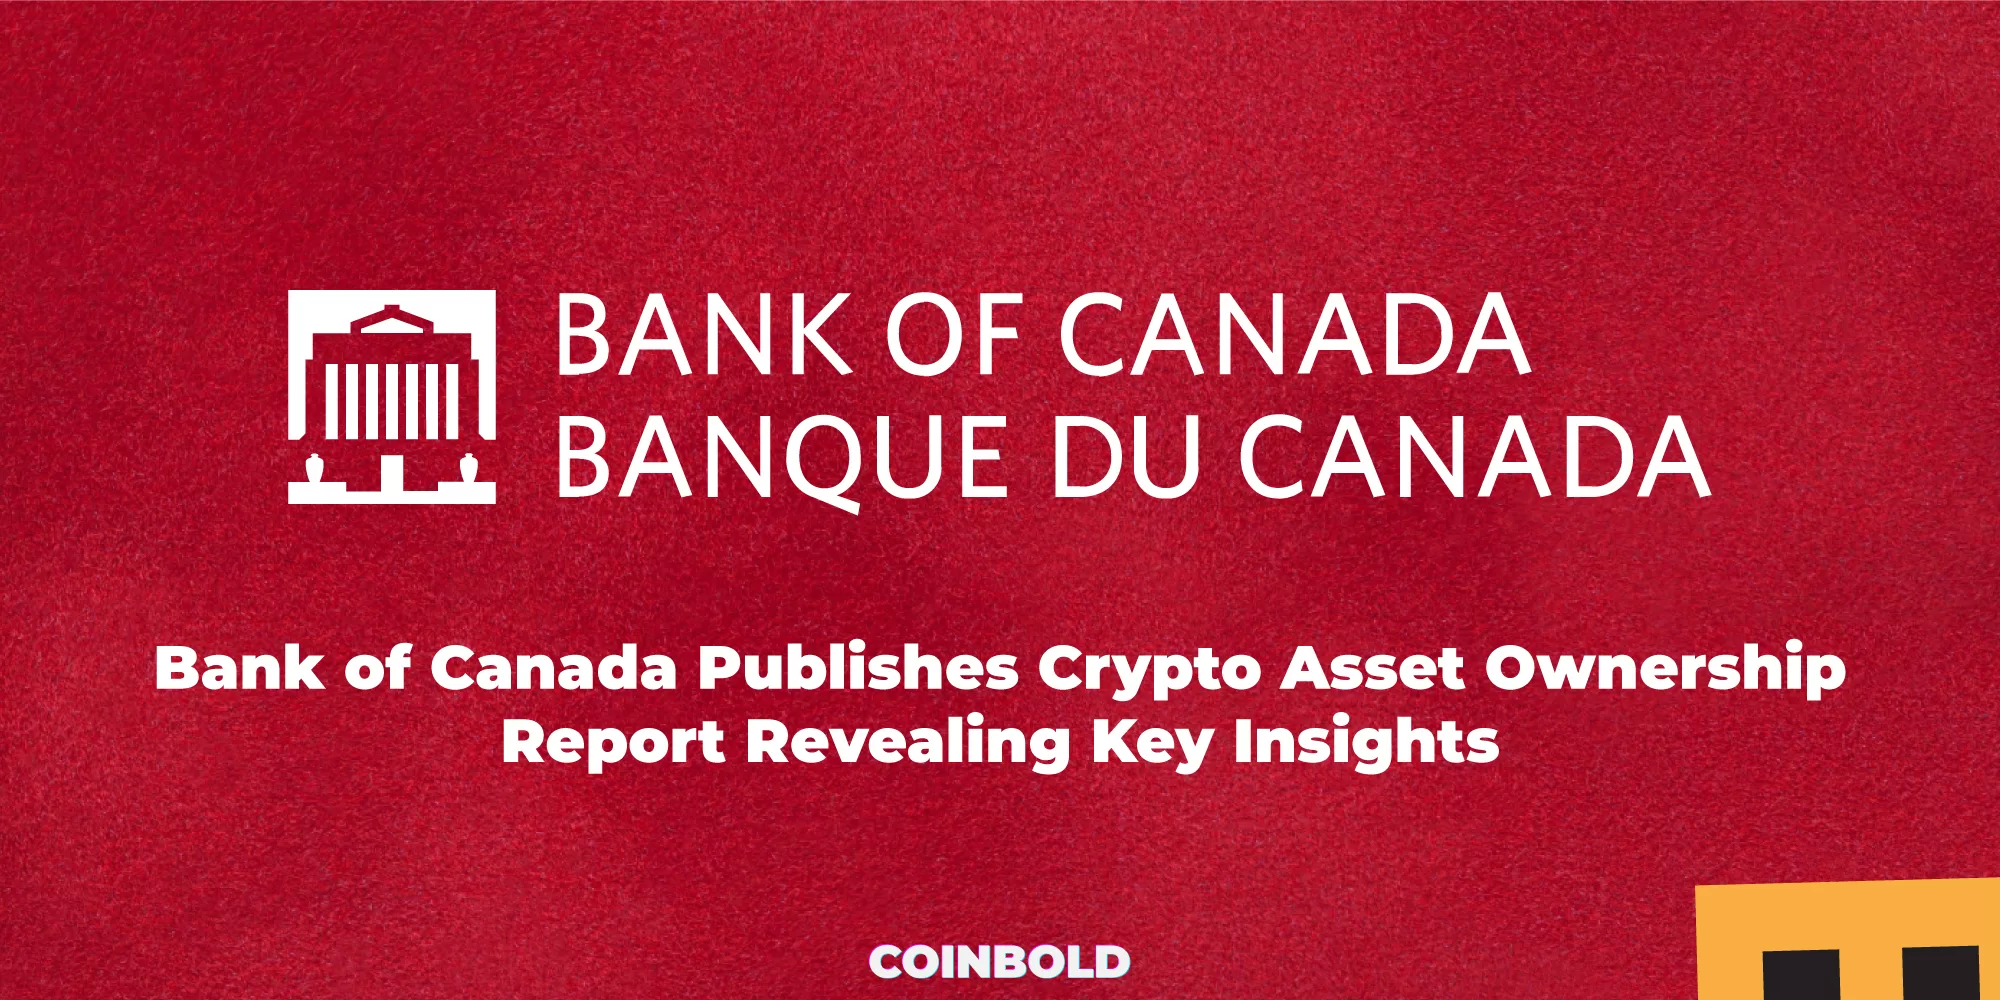 Bank of Canada Publishes Crypto Asset Ownership Report Revealing Key Insights